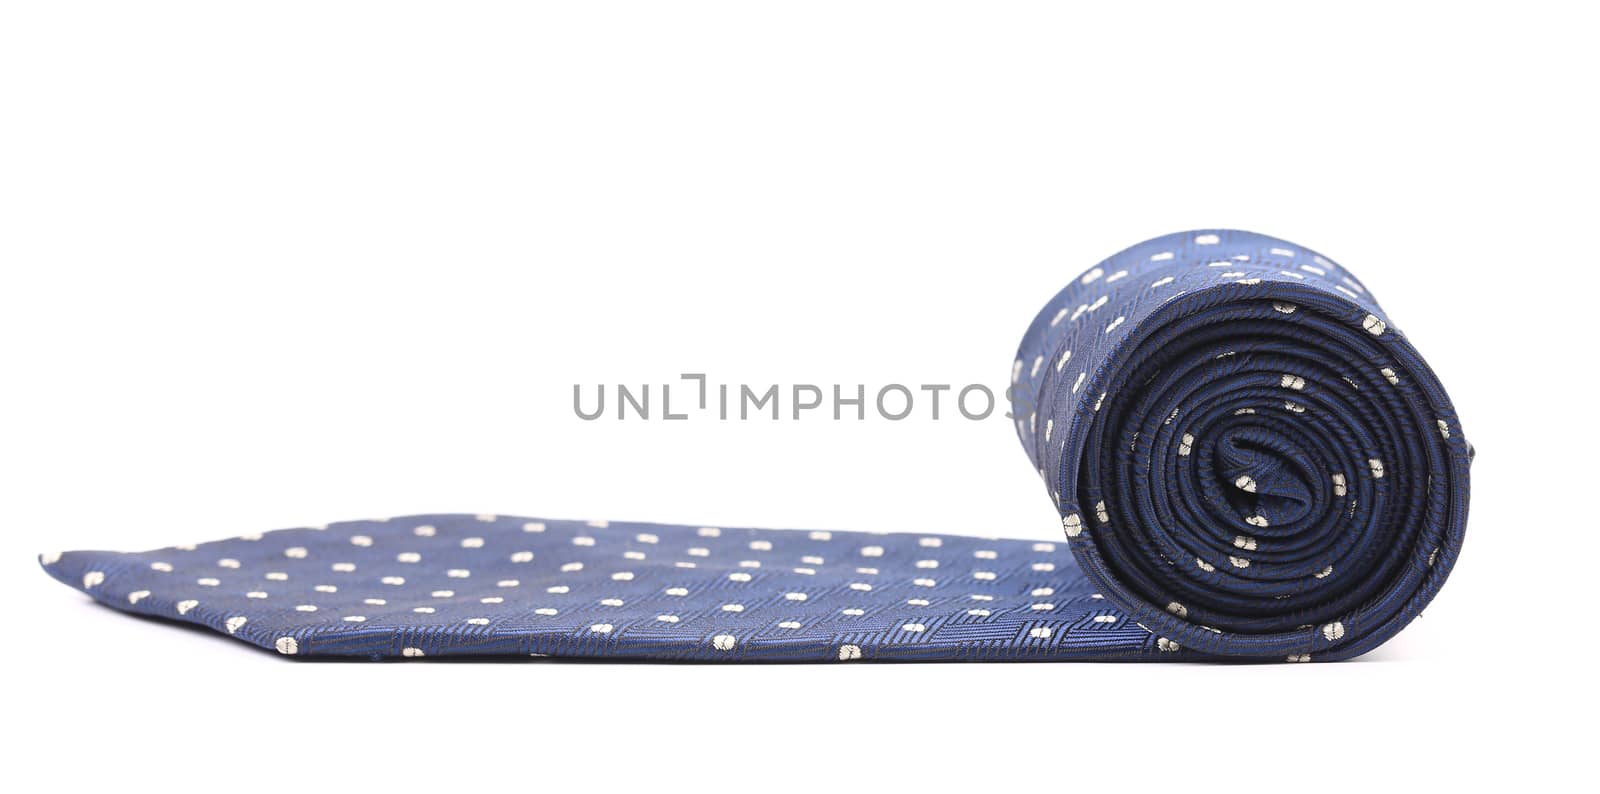 Rolled up polka dot necktie. by indigolotos